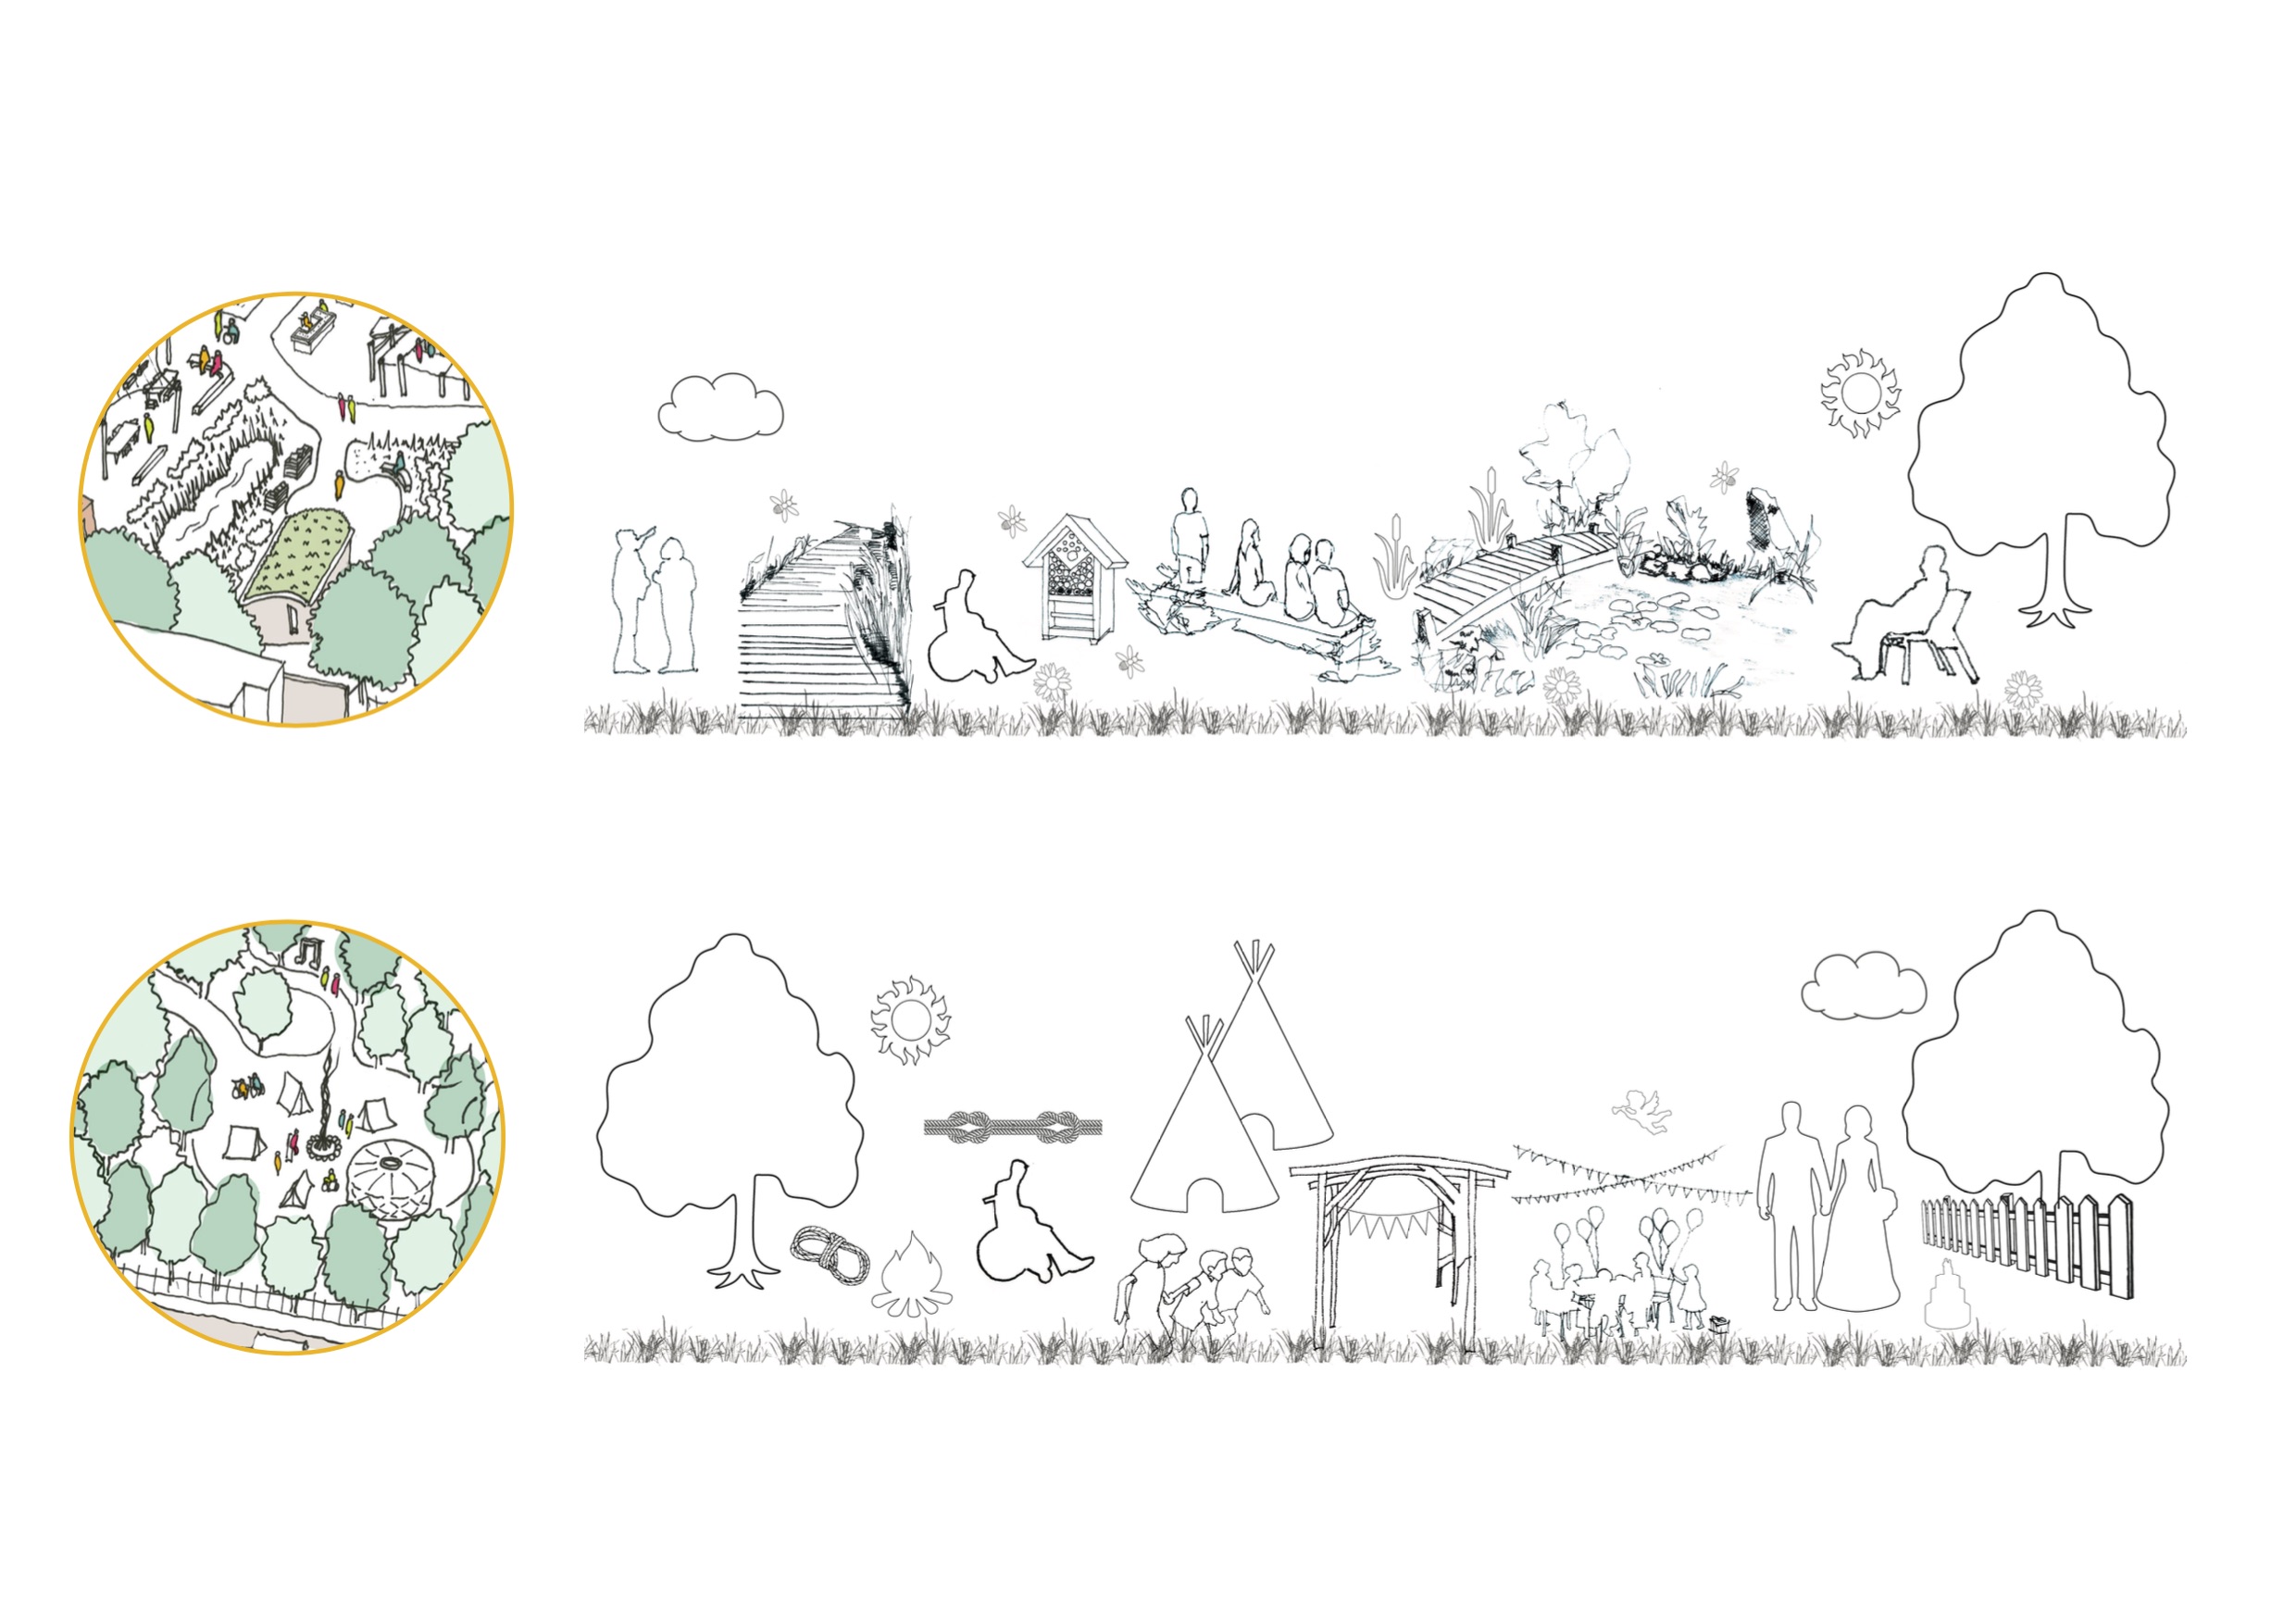 Outdoor learning and woodland walk concept sketches.jpg